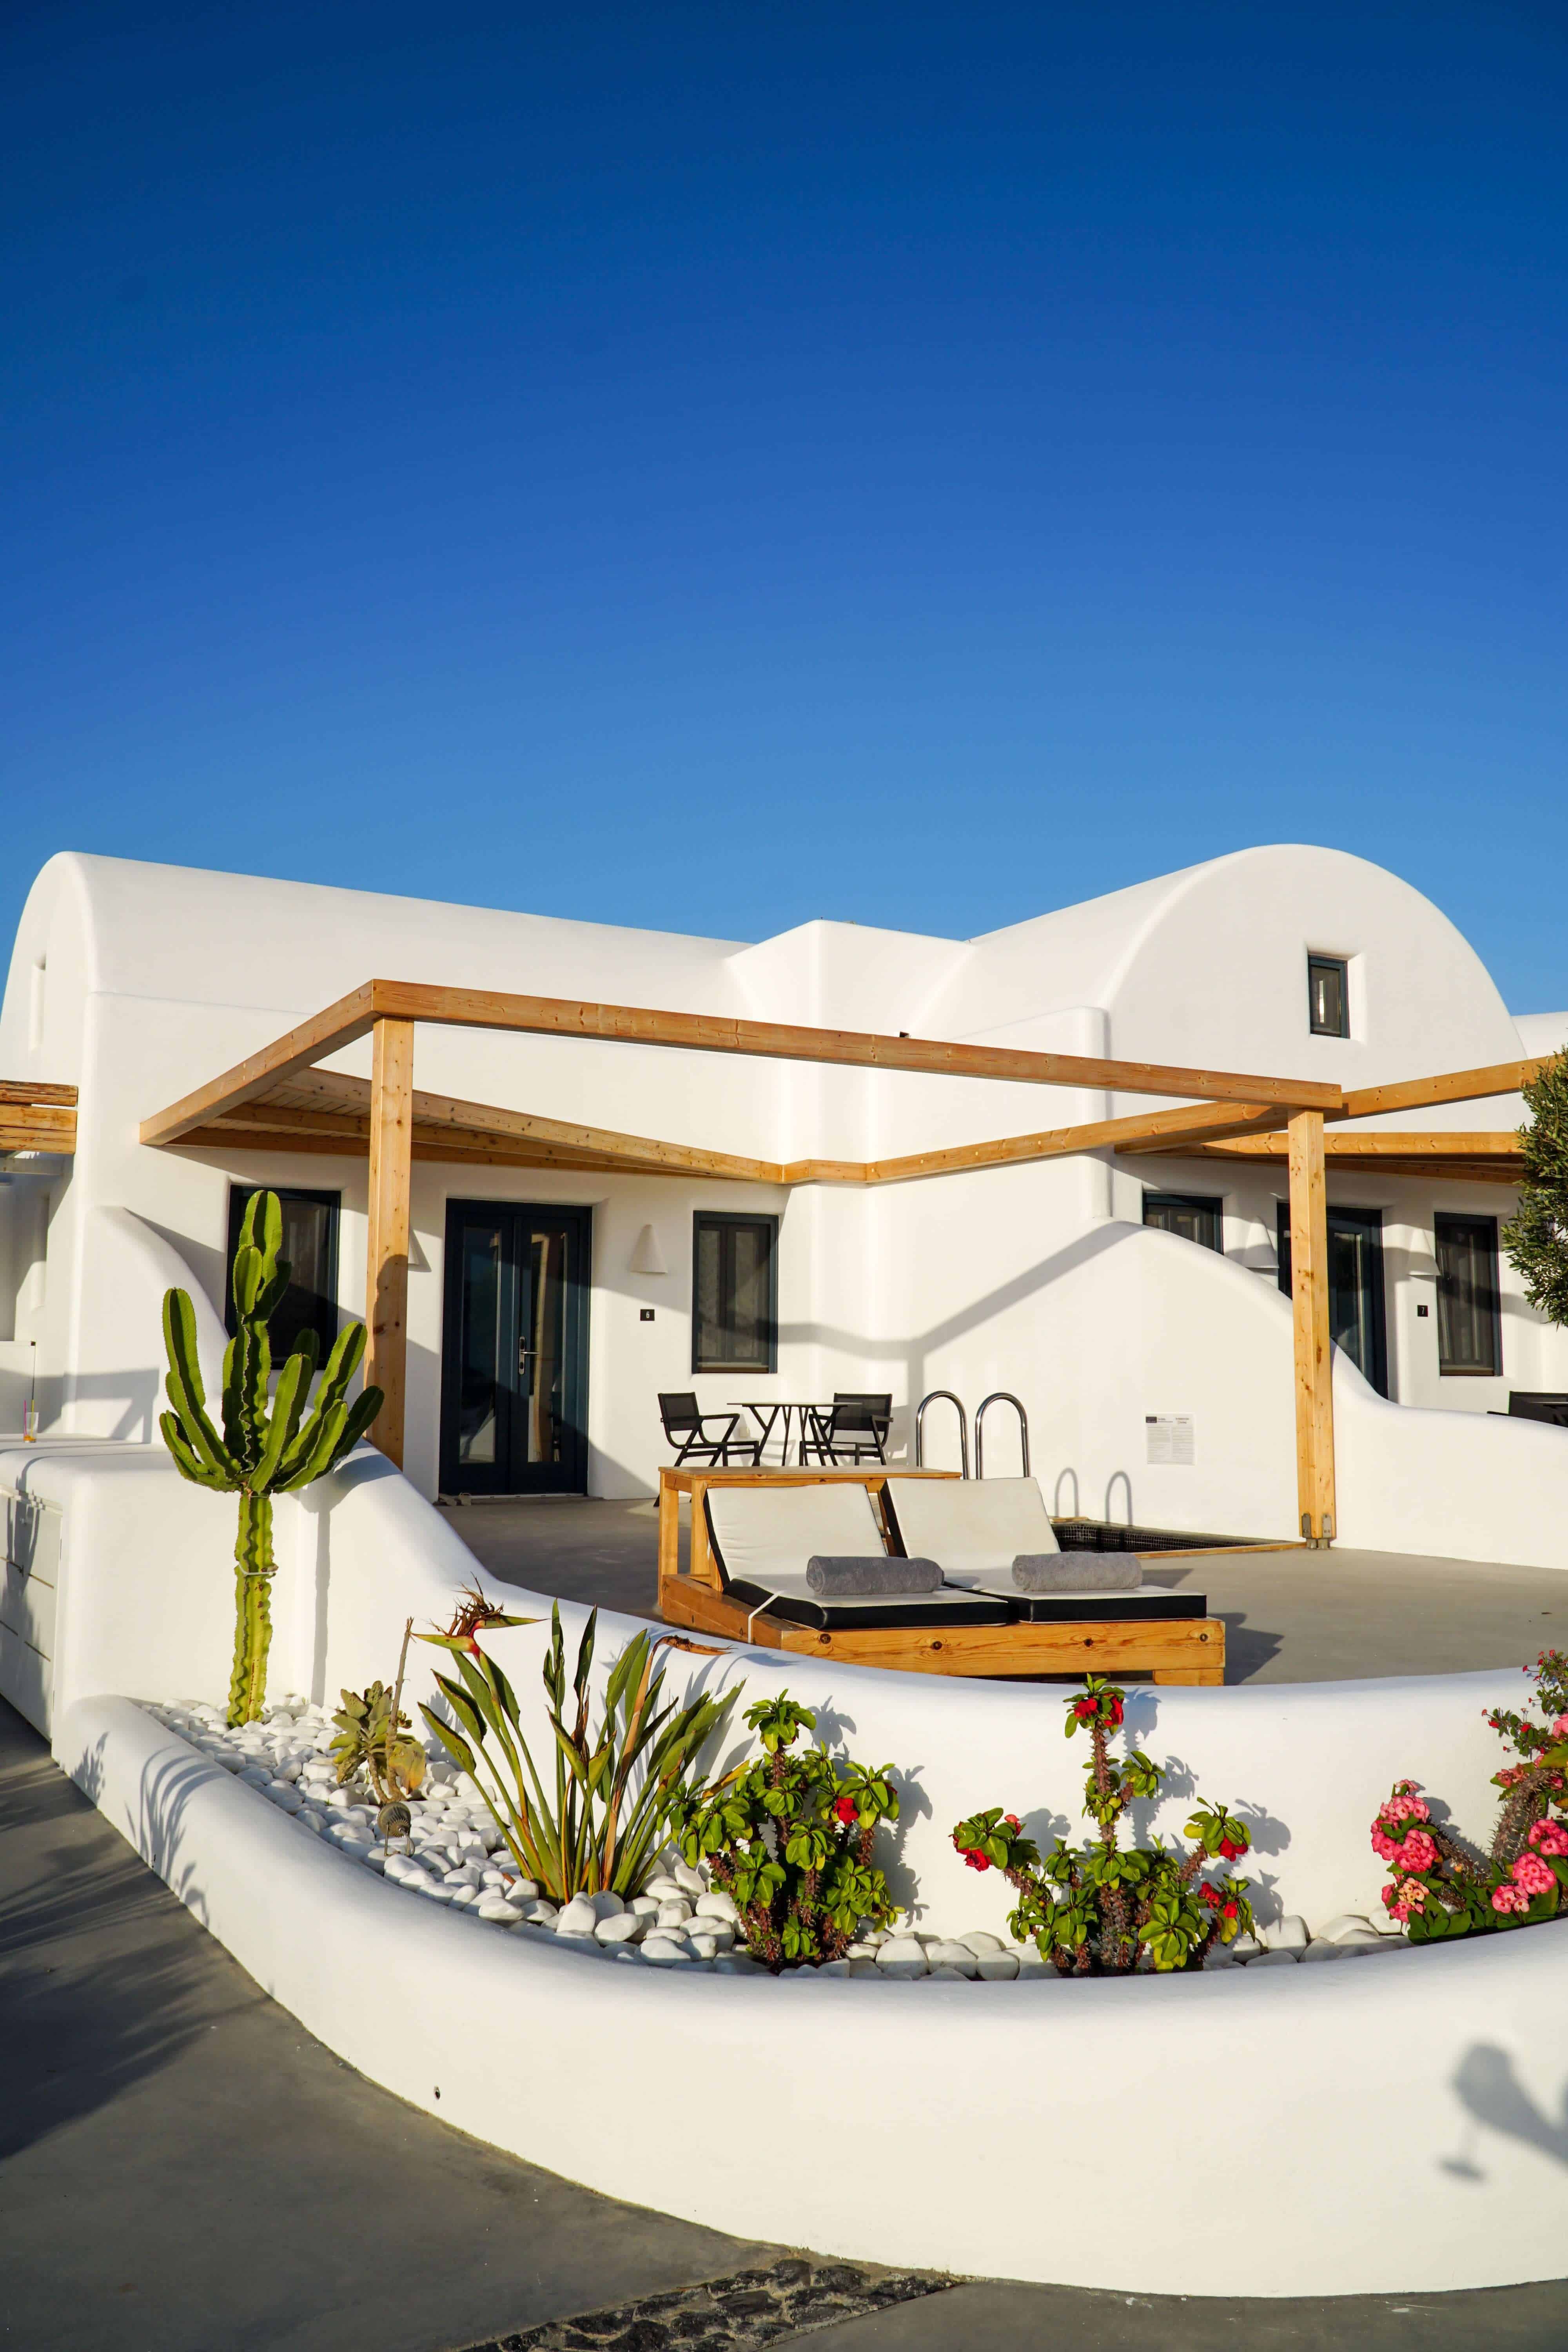 Staying at Elea Resort in Oia | The Republic of Rose